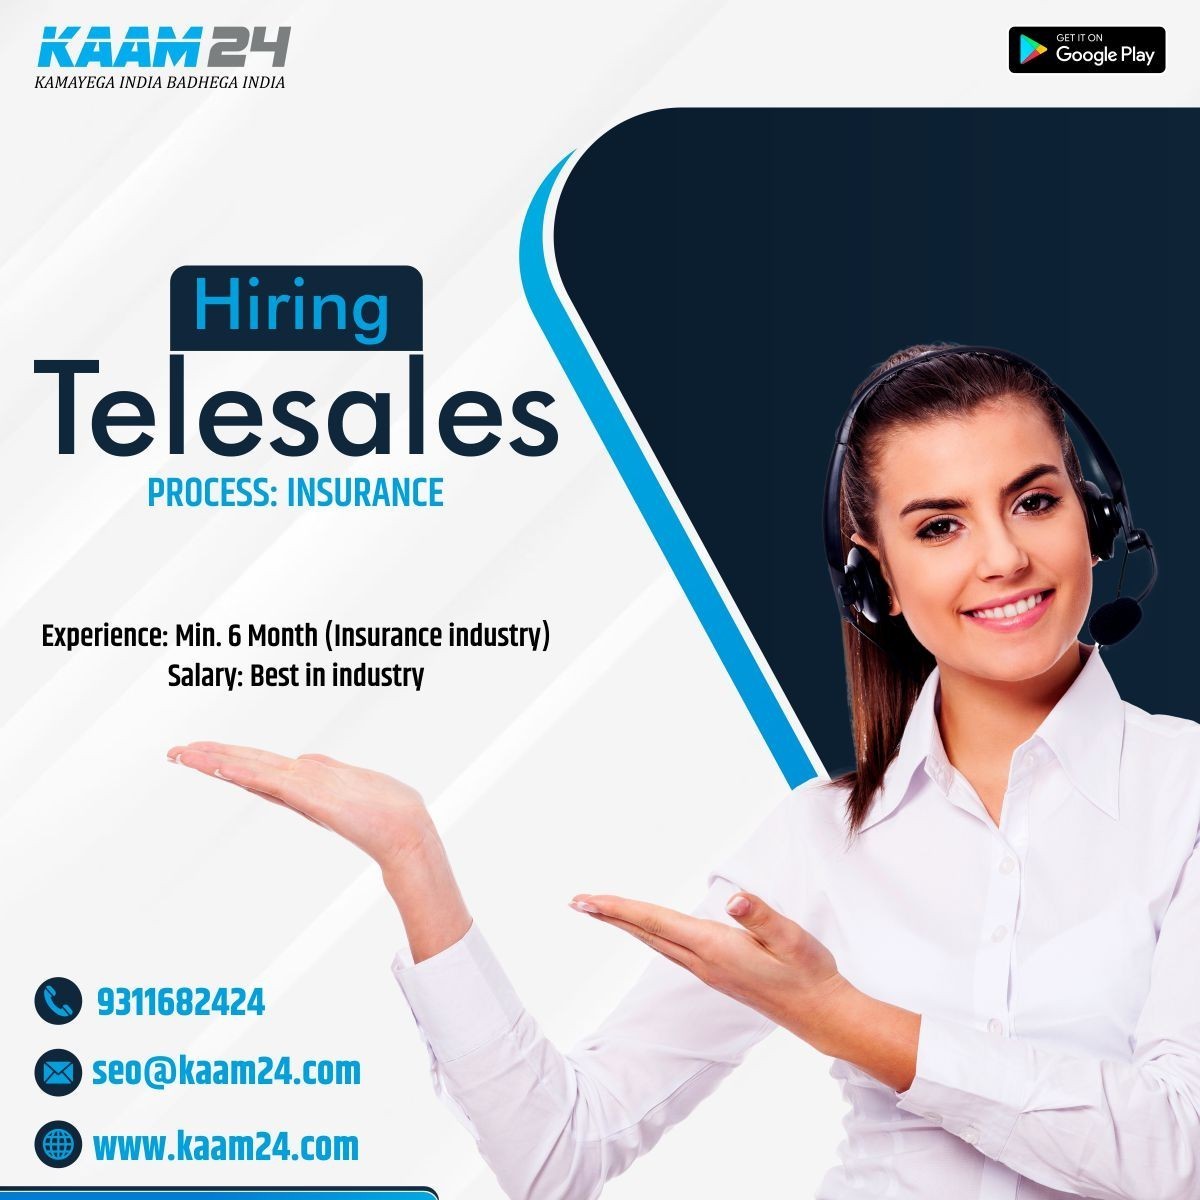 Jobs  Find Jobs  Apply for Call Center Jobs in India  Kaam24  Jobs